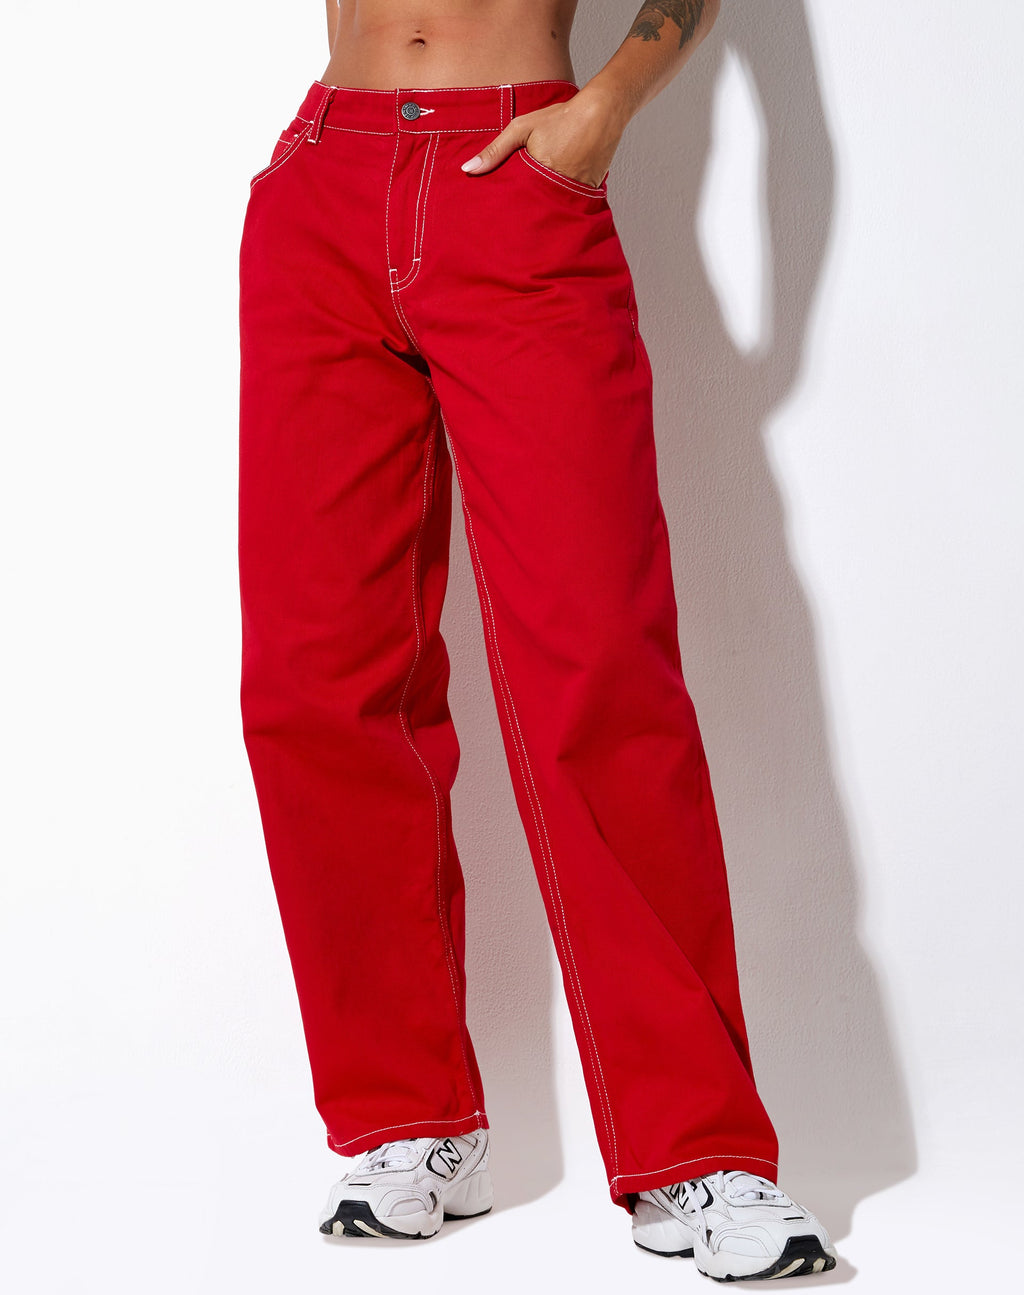 Athene Trouser in Racing Red White Stitch